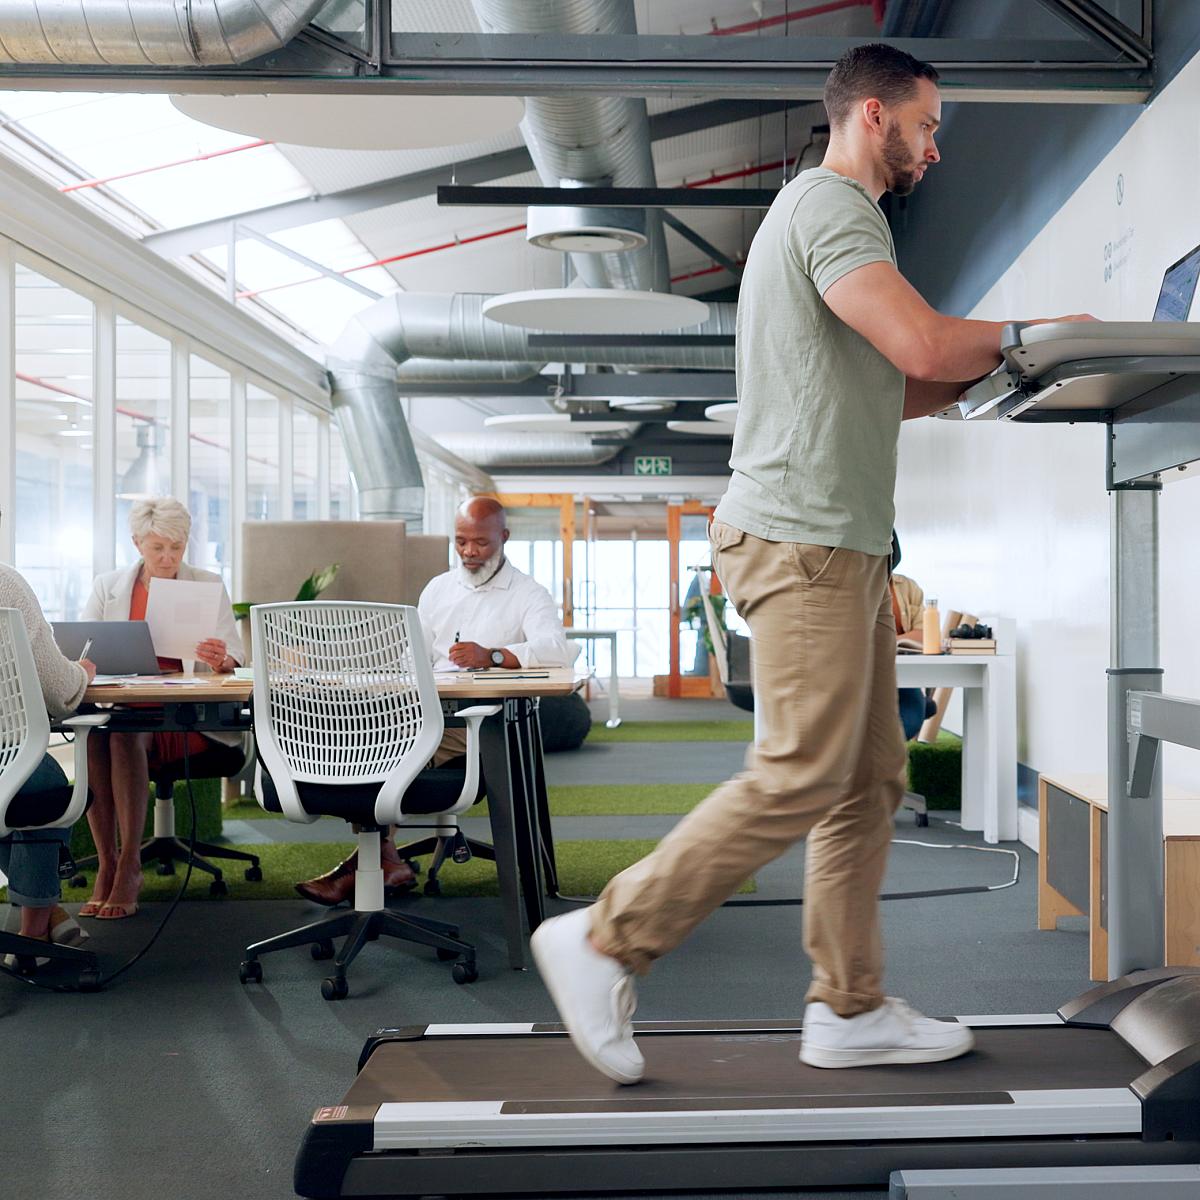 Man works at a treadmill desk while three people sit at a table behind him.